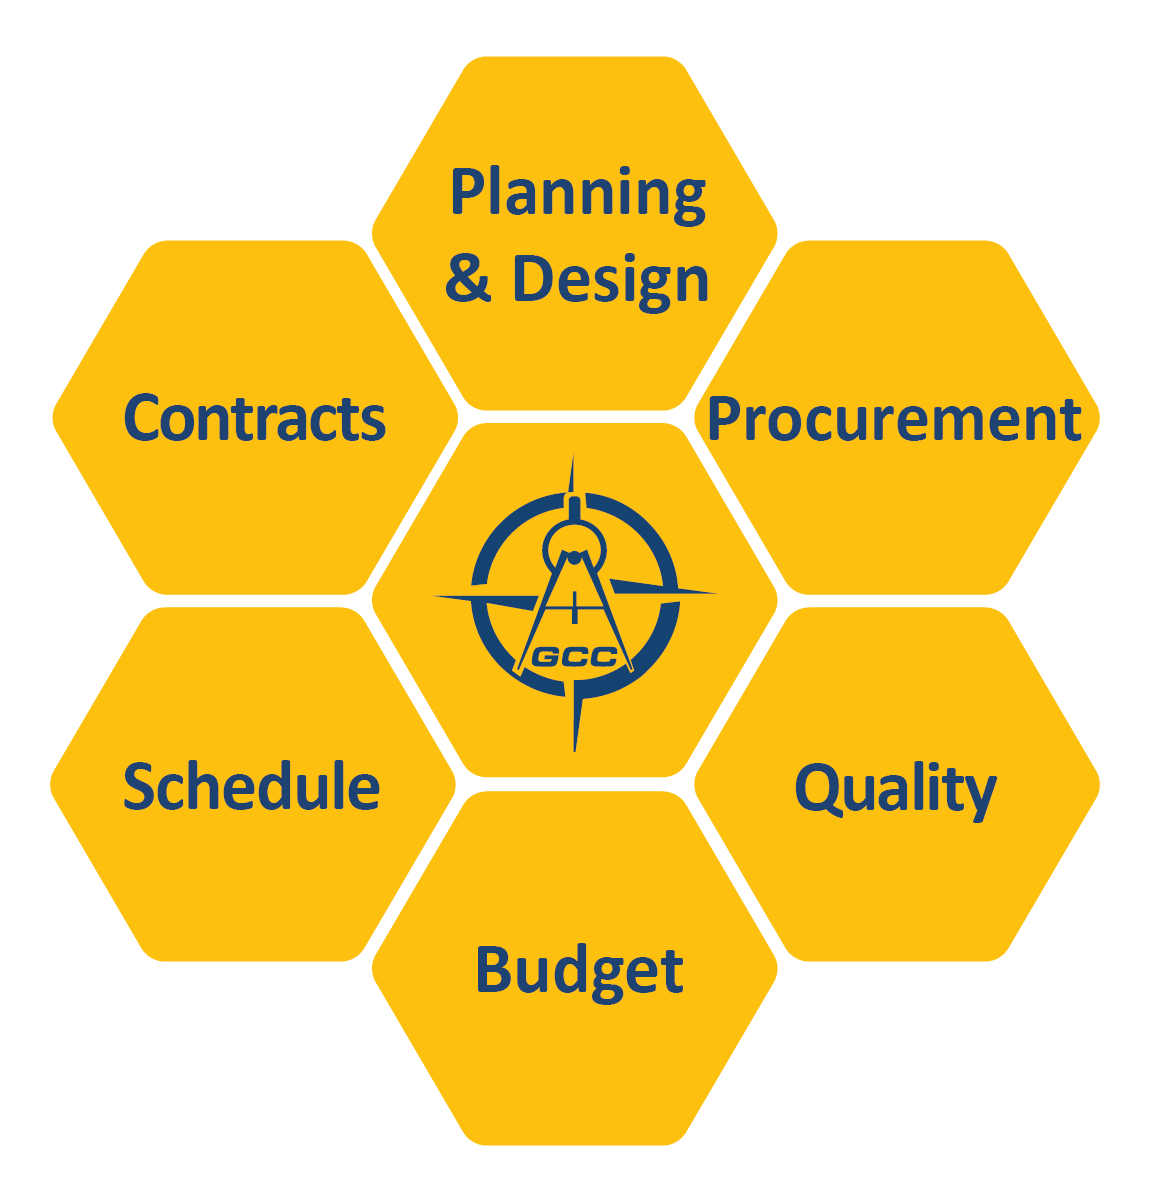 Construction Management & Project Delivery Support Beehive - 7 beehives containing the following text in each one: 1. Planning & Design 2. Procurement 3. Quality 4. Budget 5. Schedule 6. Contracts 7. GCC LLC Logo